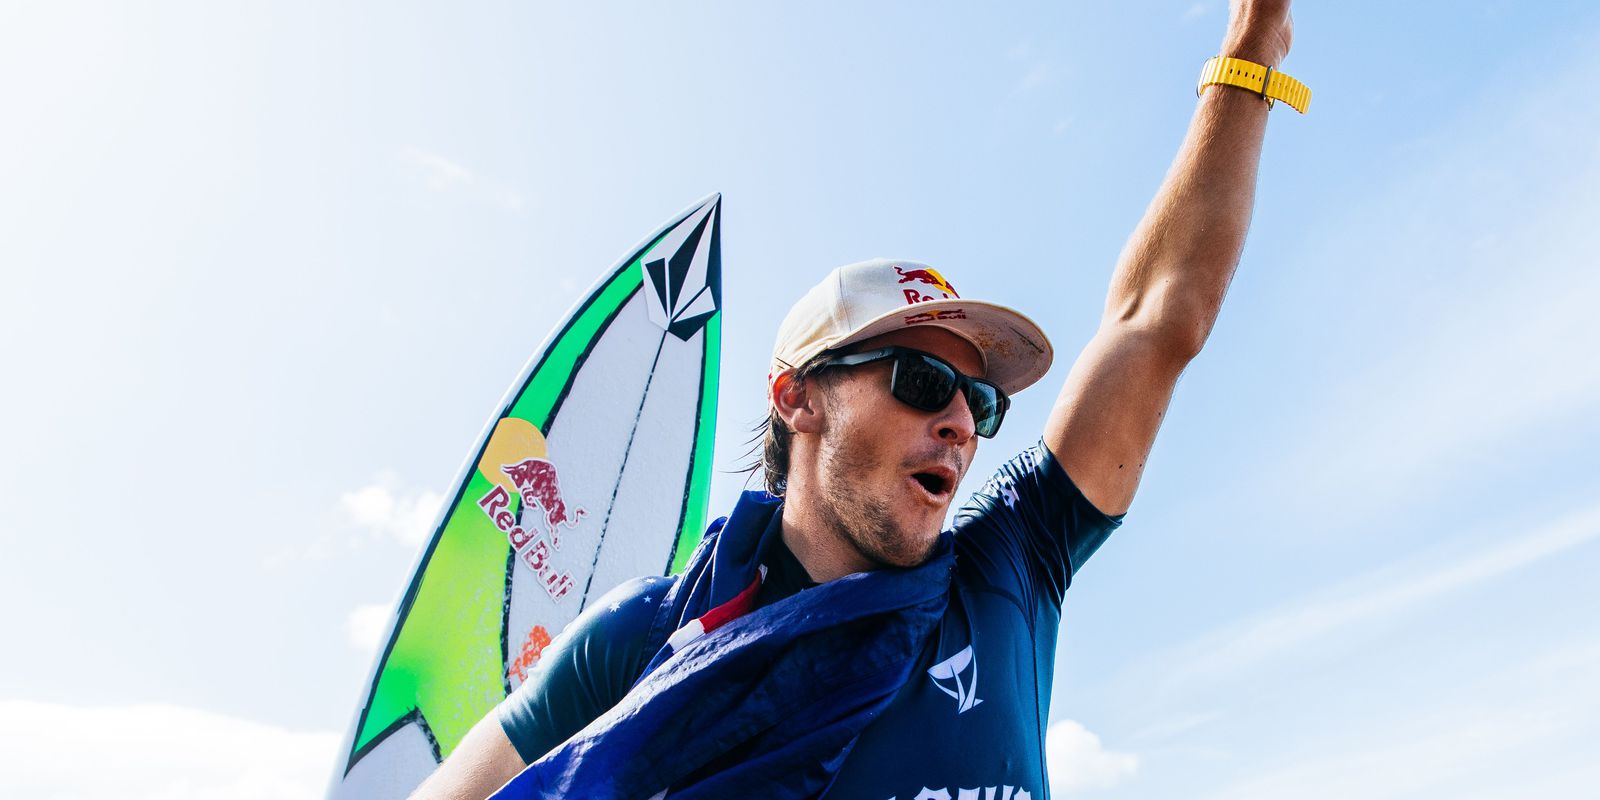 Surfing: Jack Robinson and Carissa Moore win at Pipeline